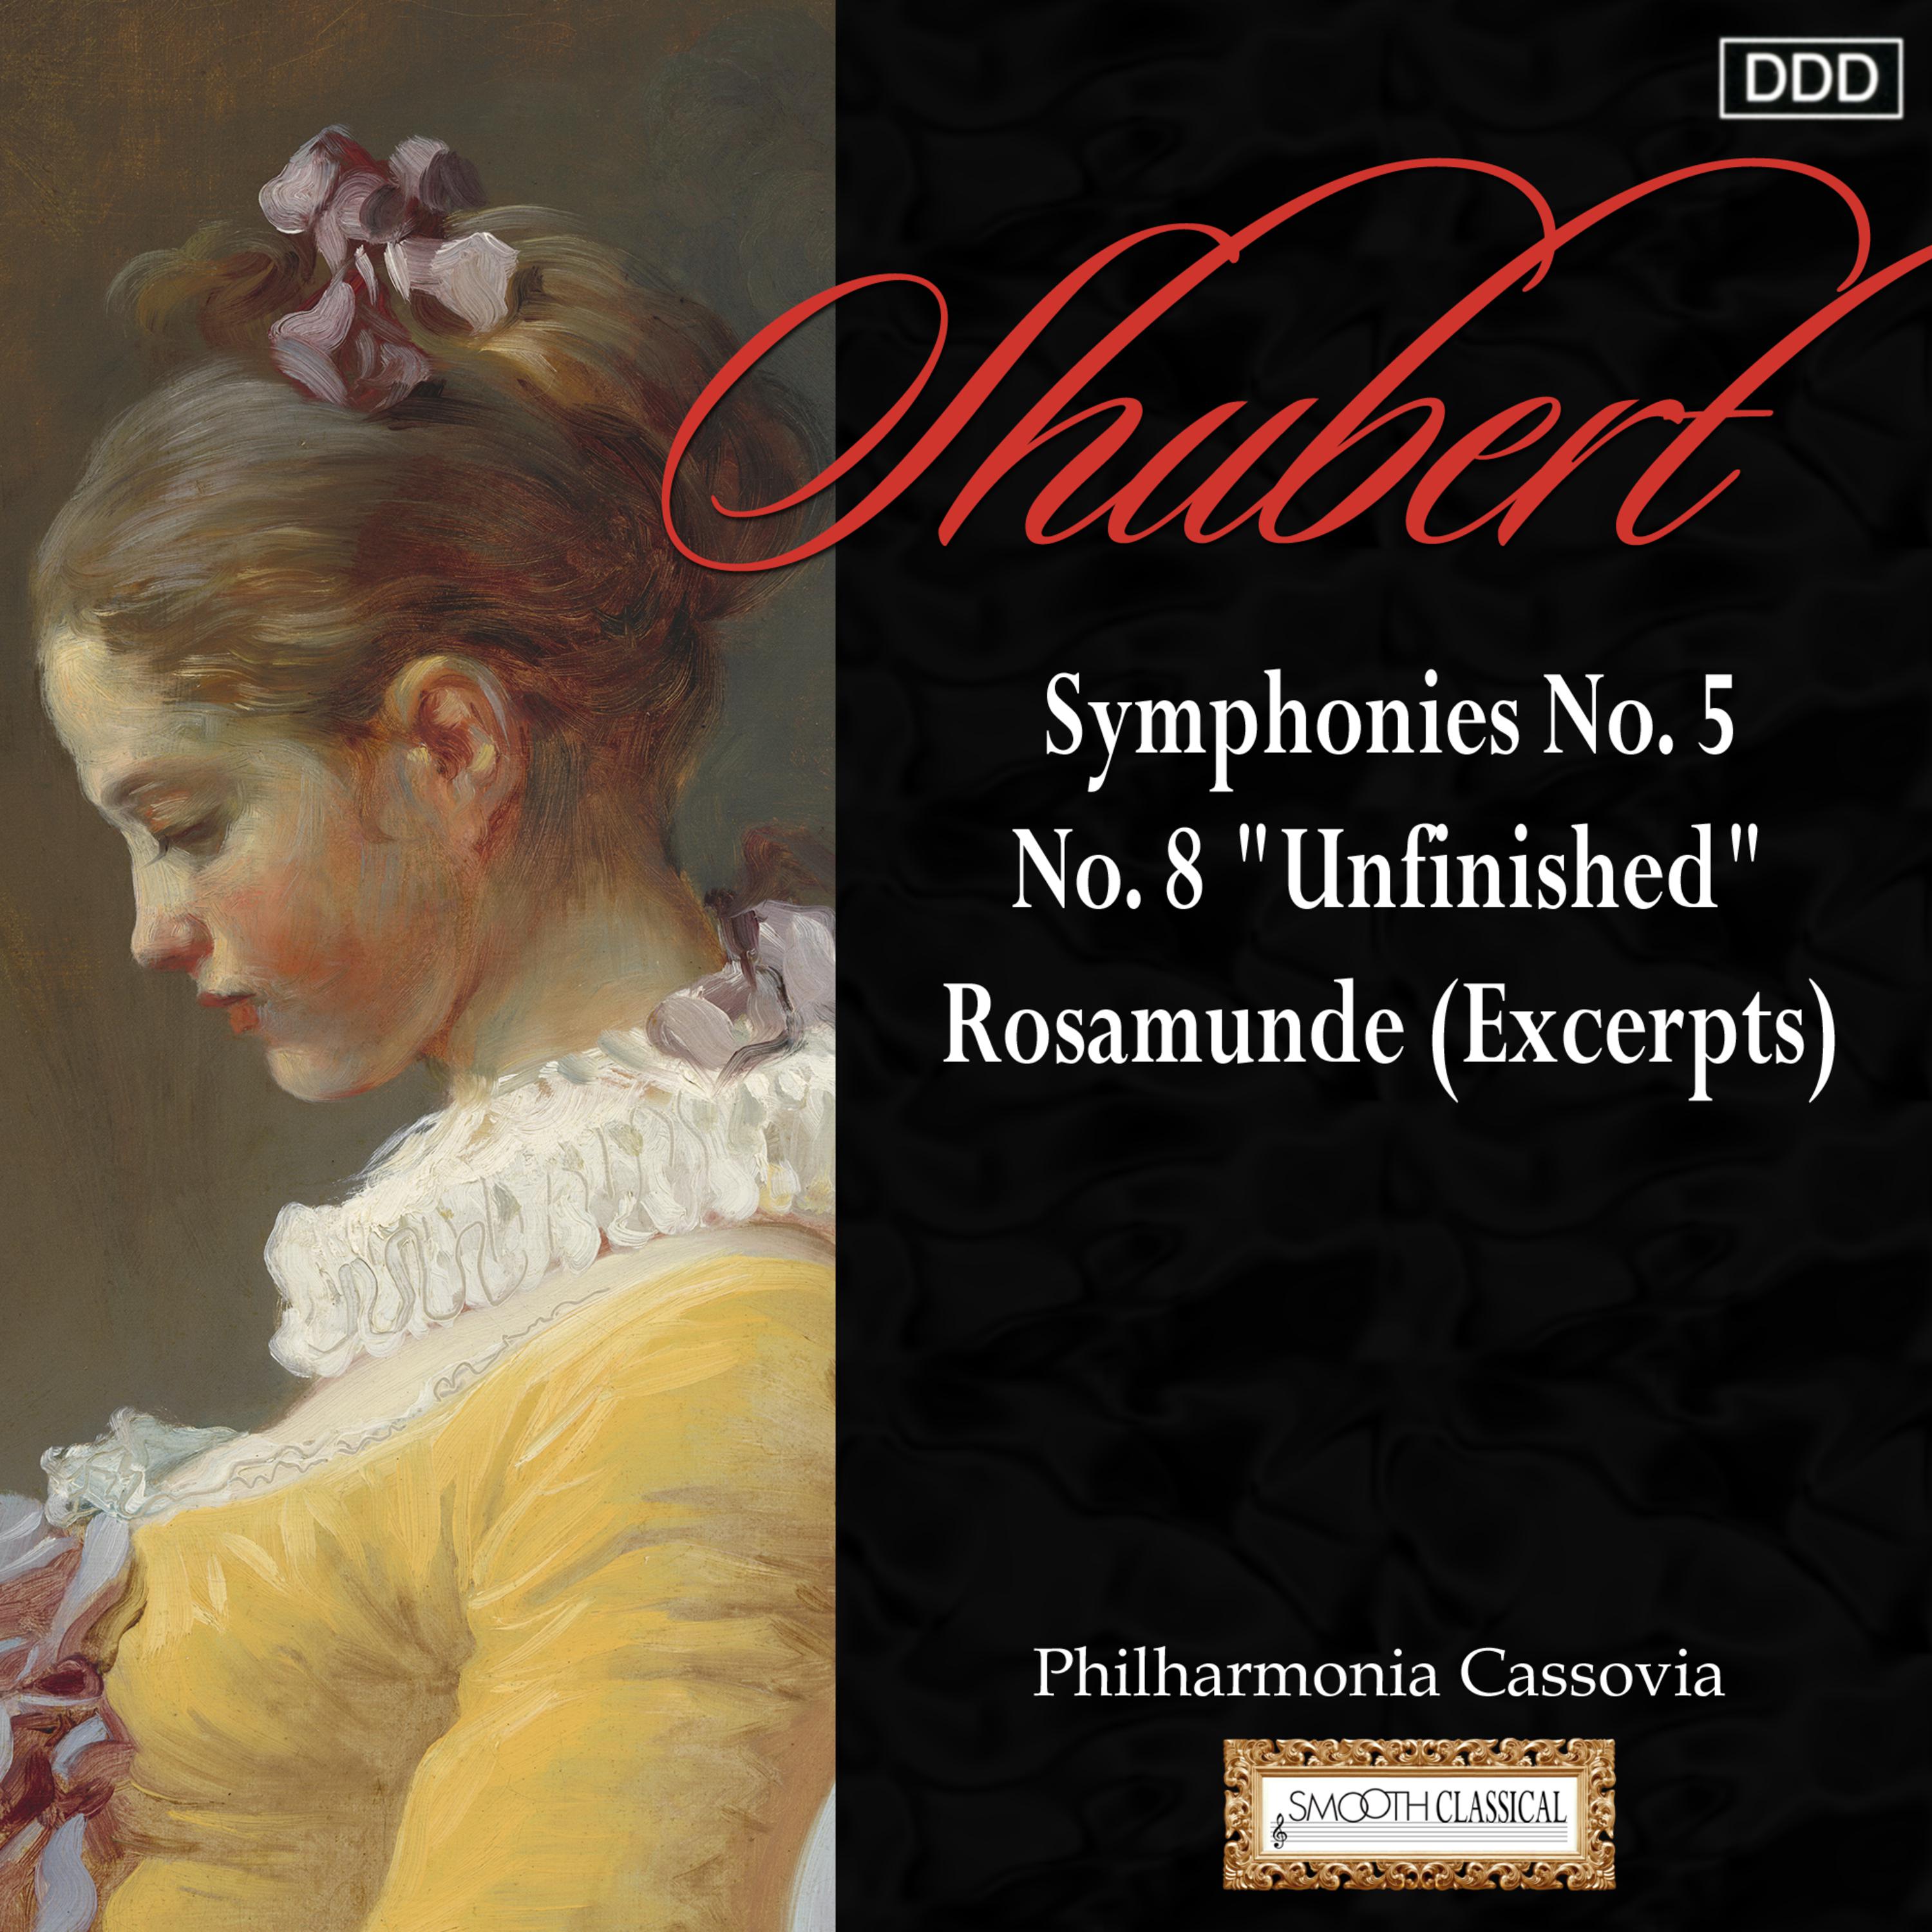 Symphony No. 7 in B Minor, D. 759 "Unfinished": I. Allegro moderato